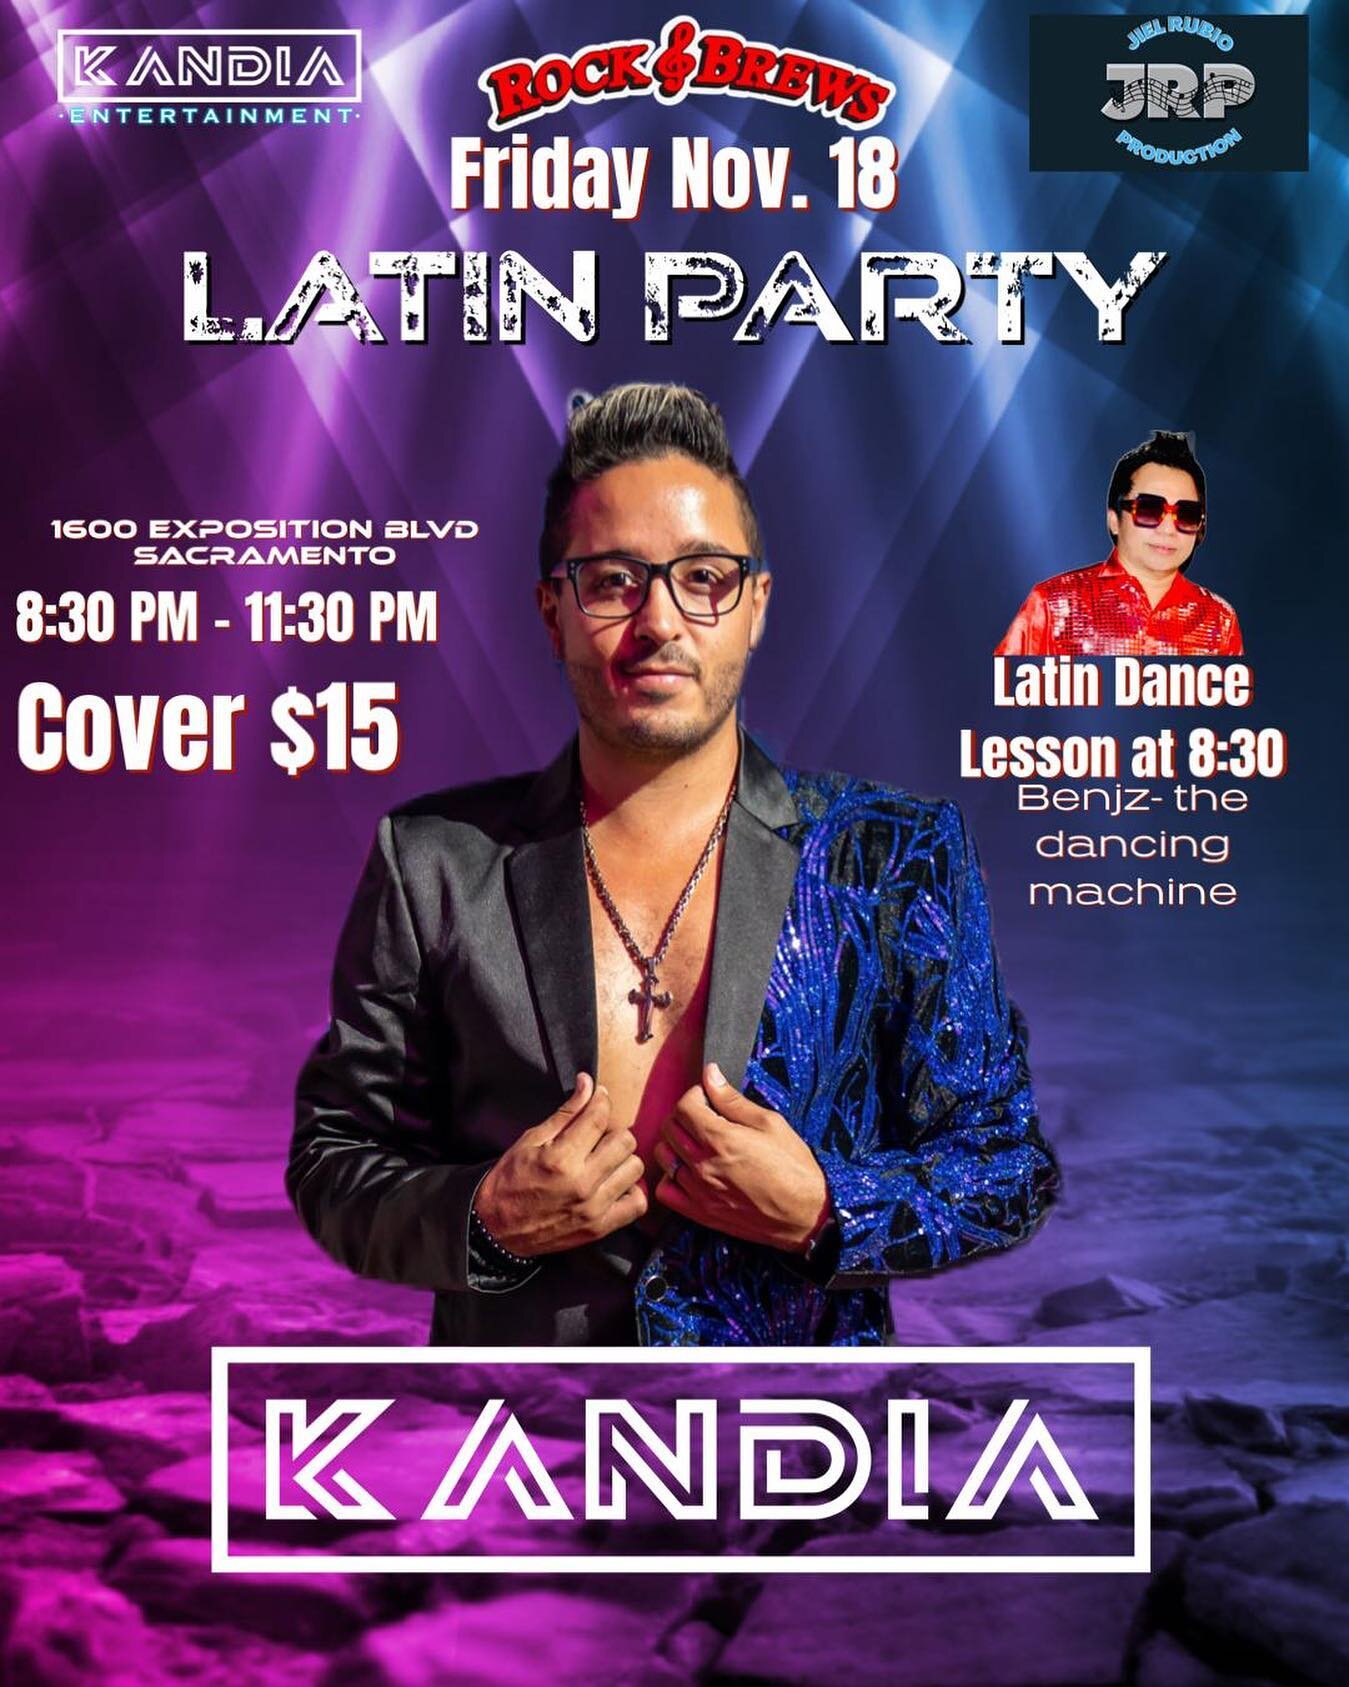 MI GENTE ! This Friday LA RUMBA it&rsquo;s at @rockandbrews_calexpo 8:30 to 11:30pm with the best #salsa #cumbia #reggaeton #merengue #bachata and more #live by @kandiag and Latin dance class with @benjz_the_dancingmachine . Come and enjoy the best f